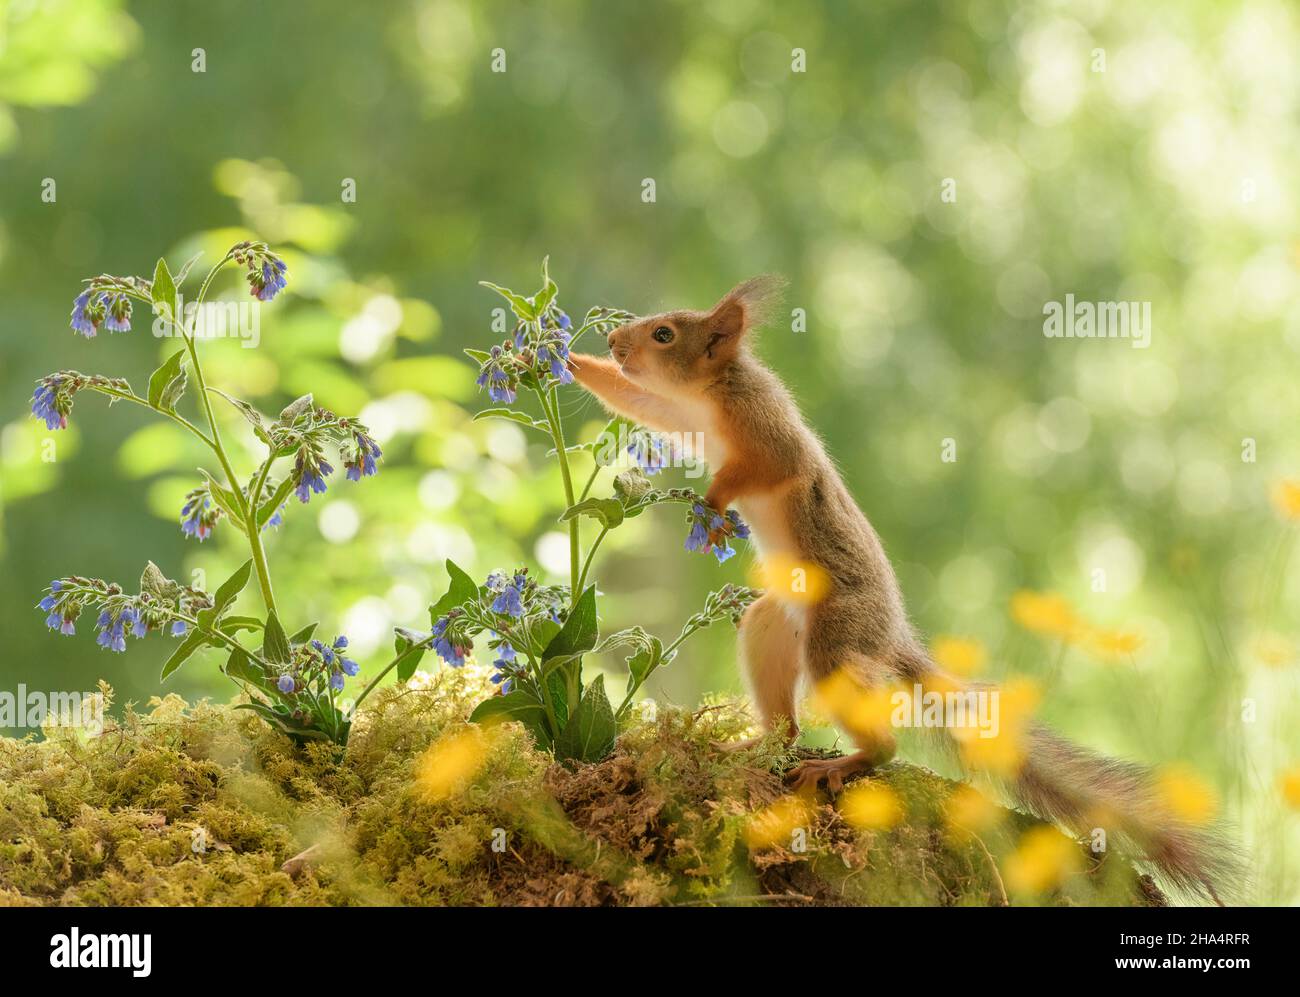 young red squirrel is looking away from comfrey flowers Stock Photo